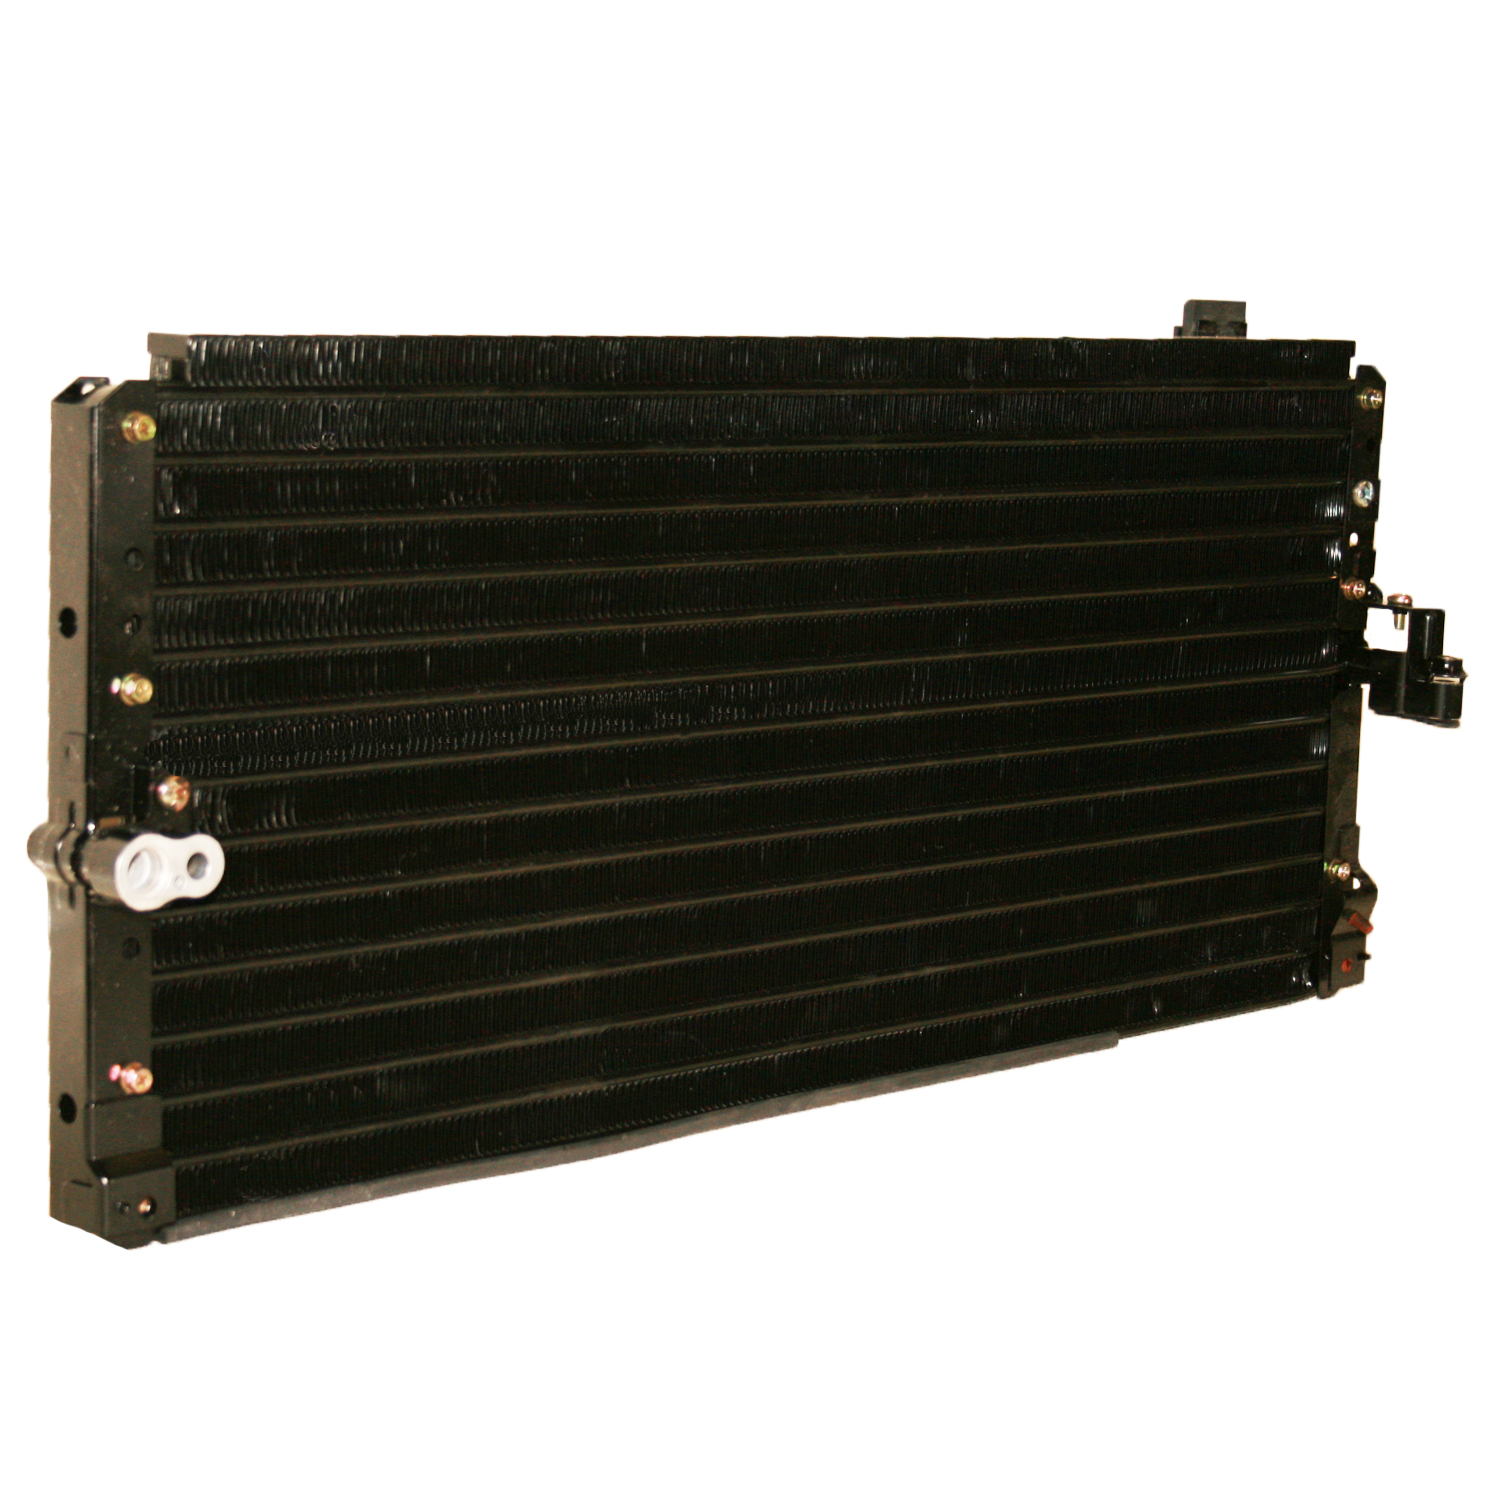 TCW Condenser 44-4216 New Product Image field_60b6a13a6e67c